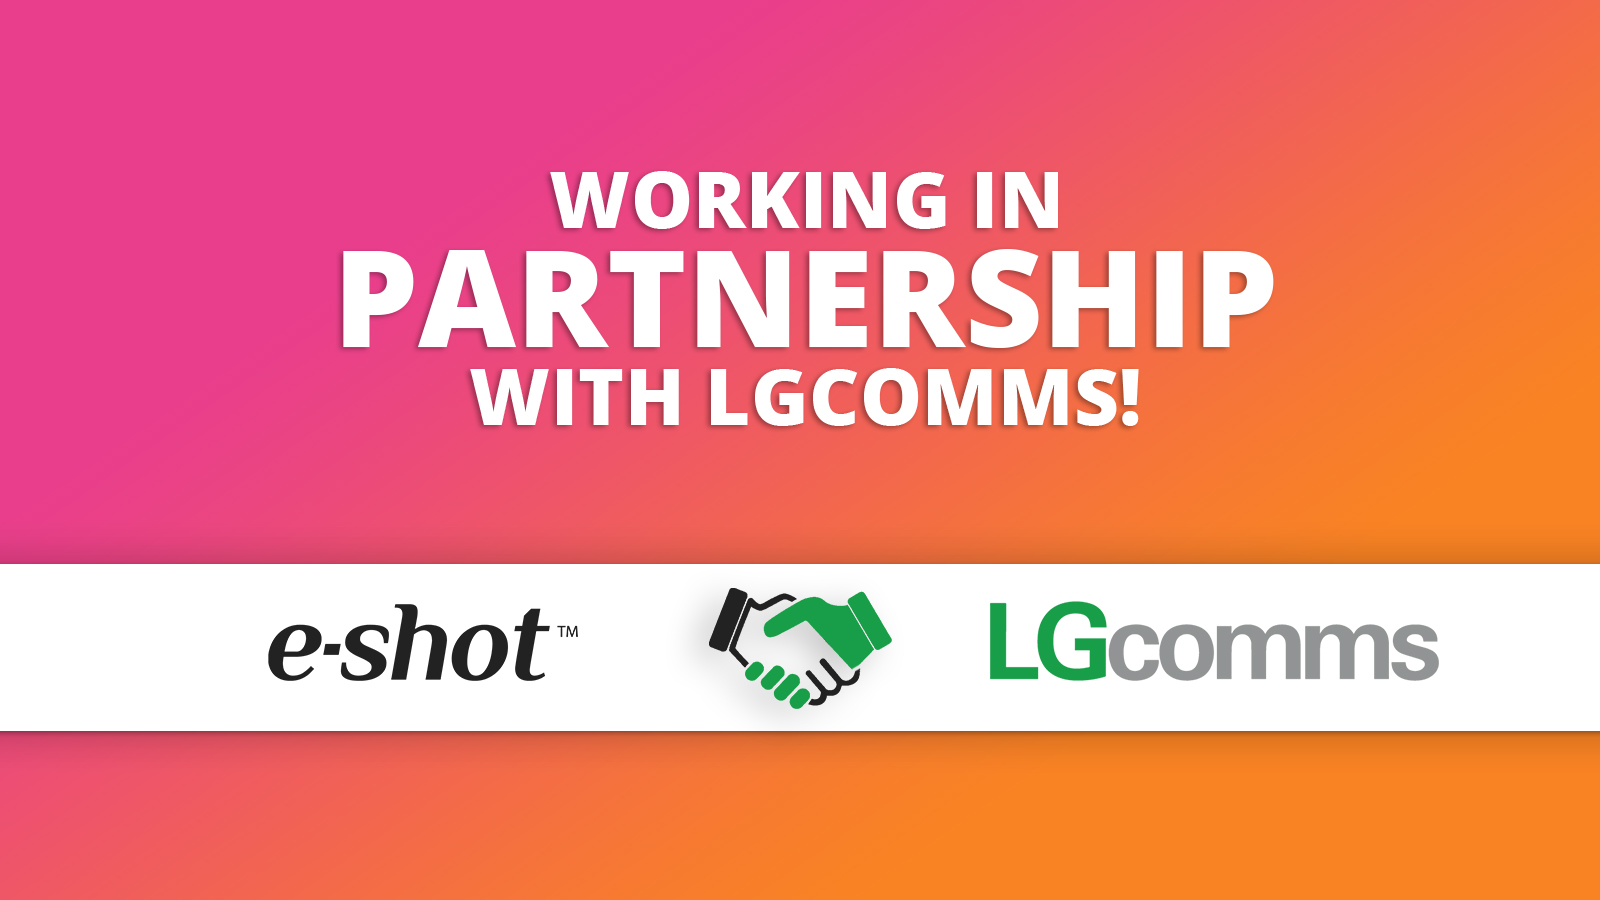 e-shot and LGComms in partnership